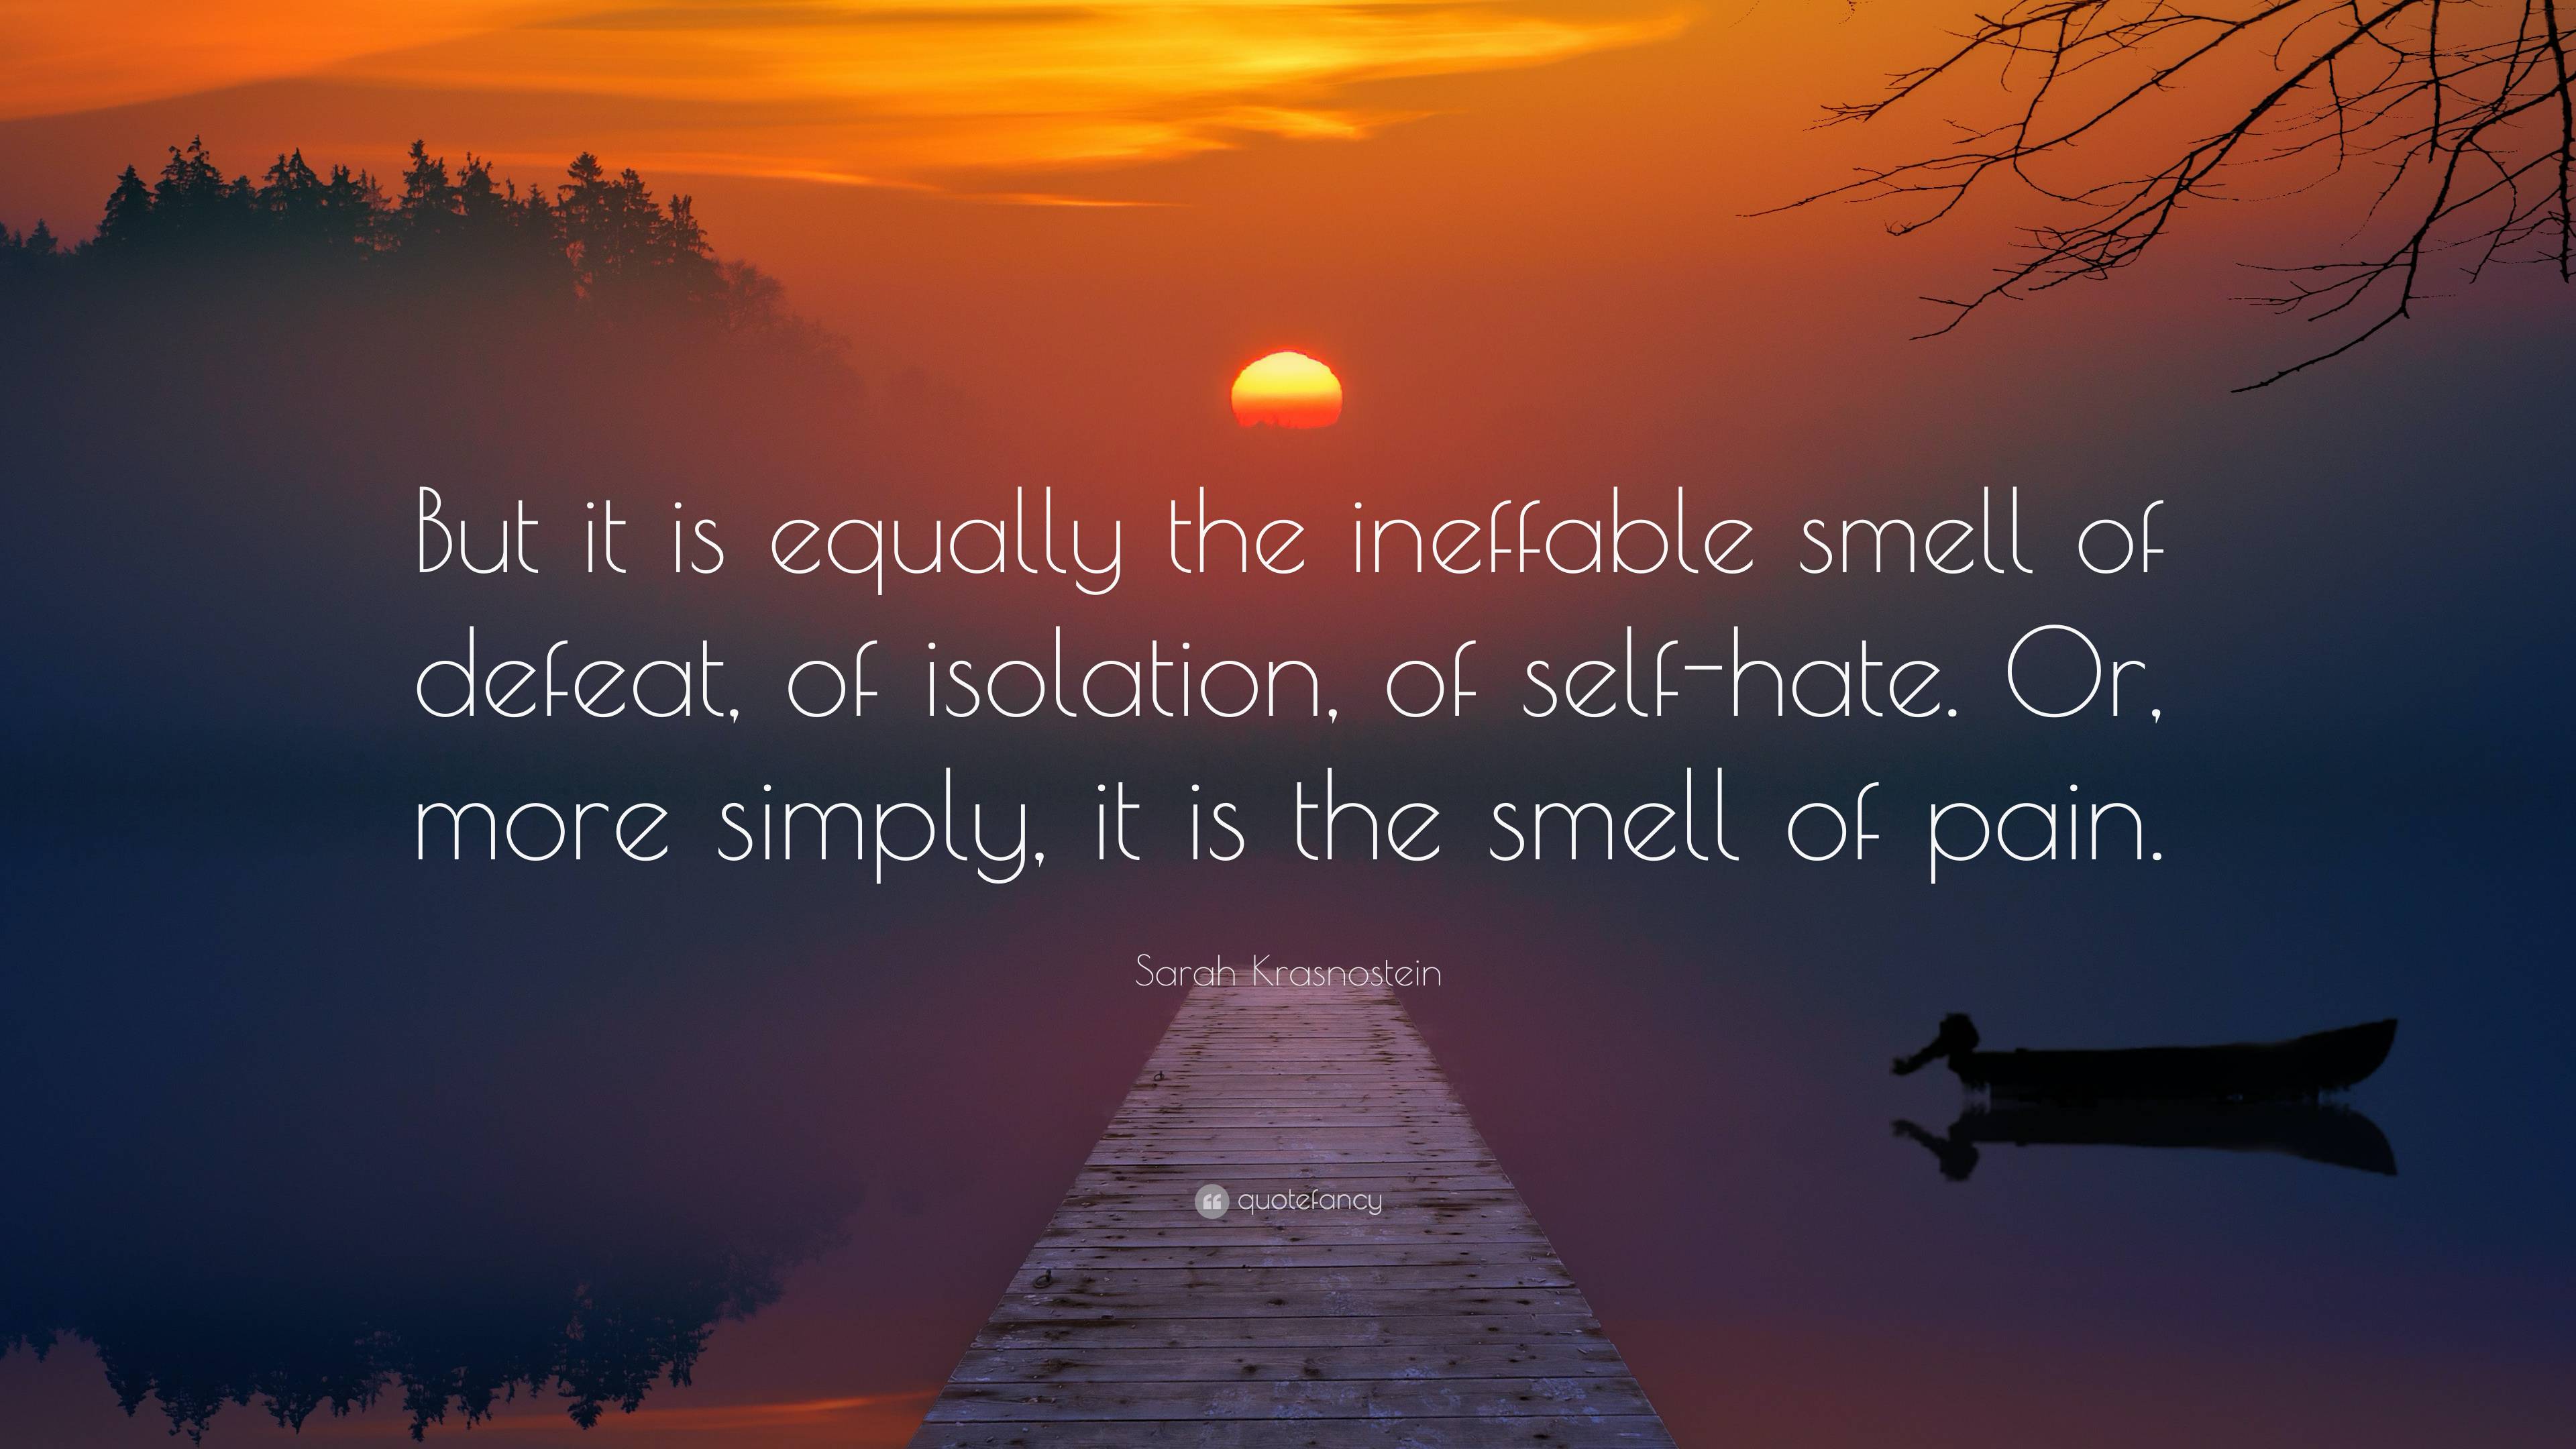 Sarah Krasnostein Quote: “But it is equally the ineffable smell of ...